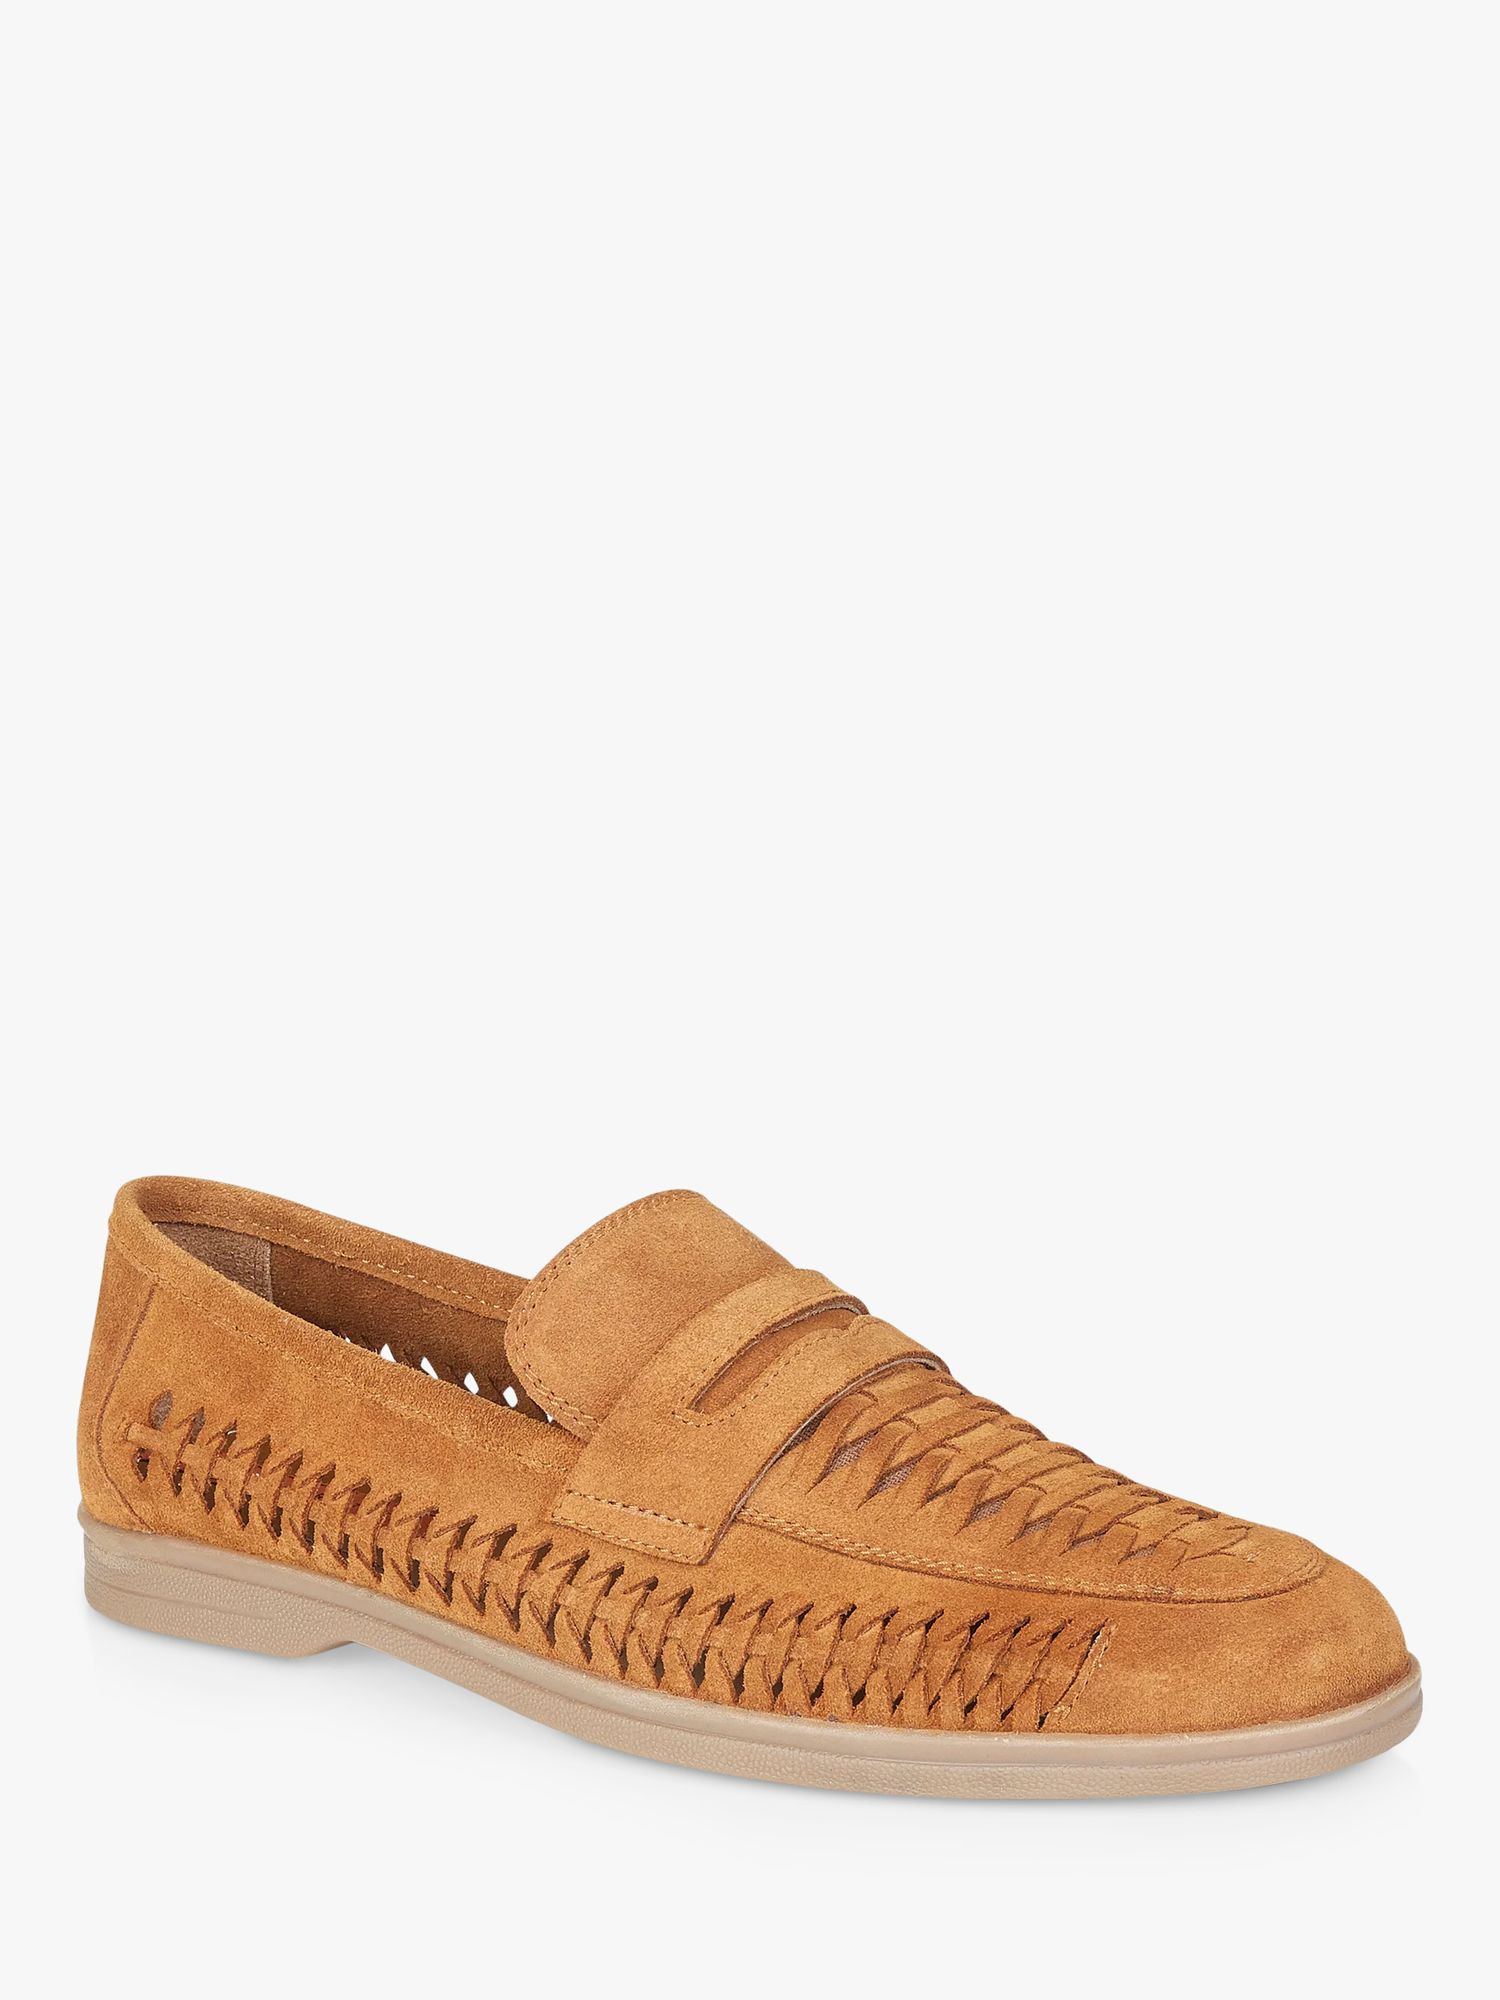 Silver Street London Perth Suede Loafers, Tan at John Lewis & Partners